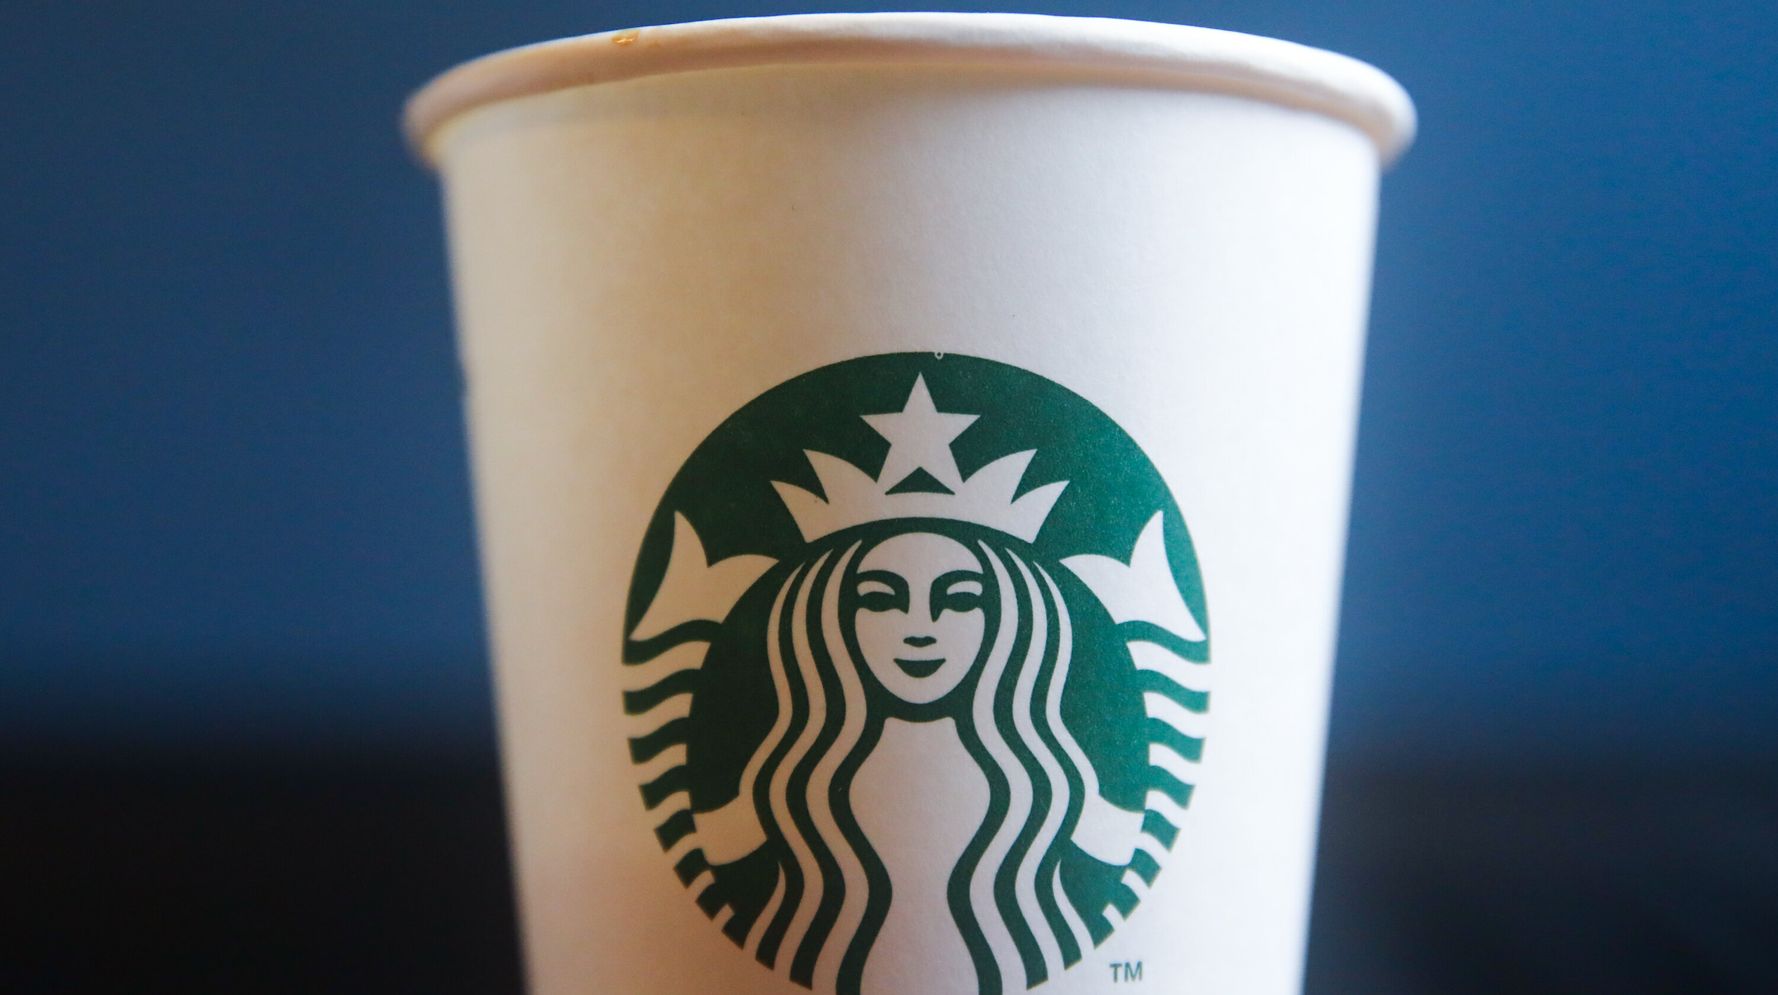 Starbucks Broke Law By Firing And Threatening Pro-Union Workers, Labor Board All..